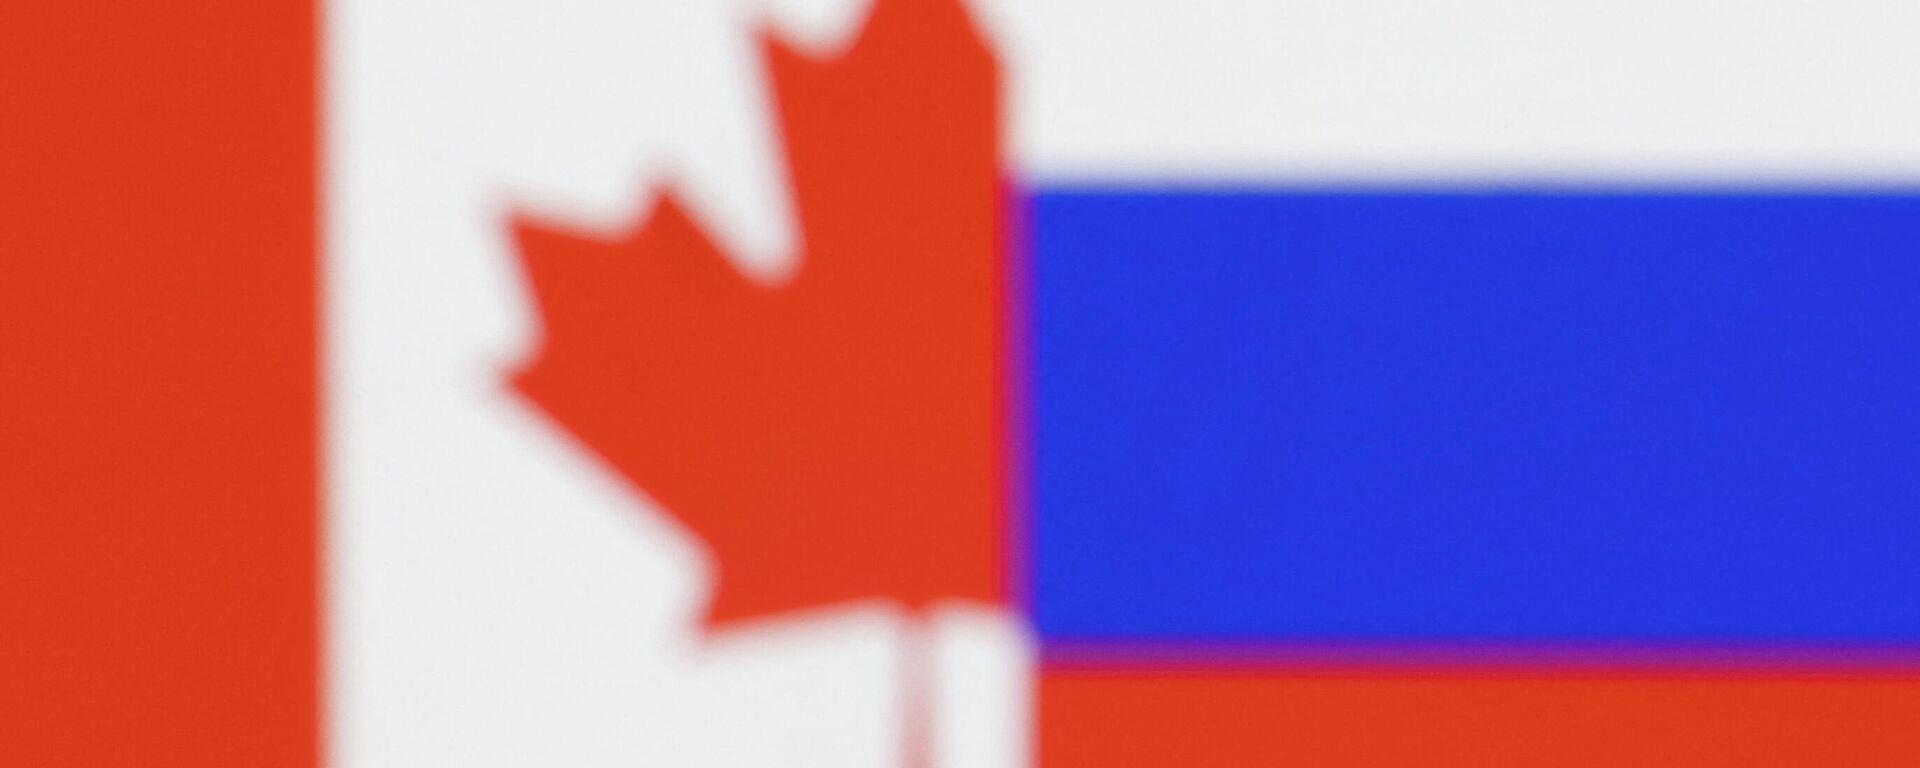 Plastic letters arranged to read Sanctions are placed in front the flag colors of Canada and Russia in this illustration taken February 28, 2022 - Sputnik International, 1920, 11.03.2022